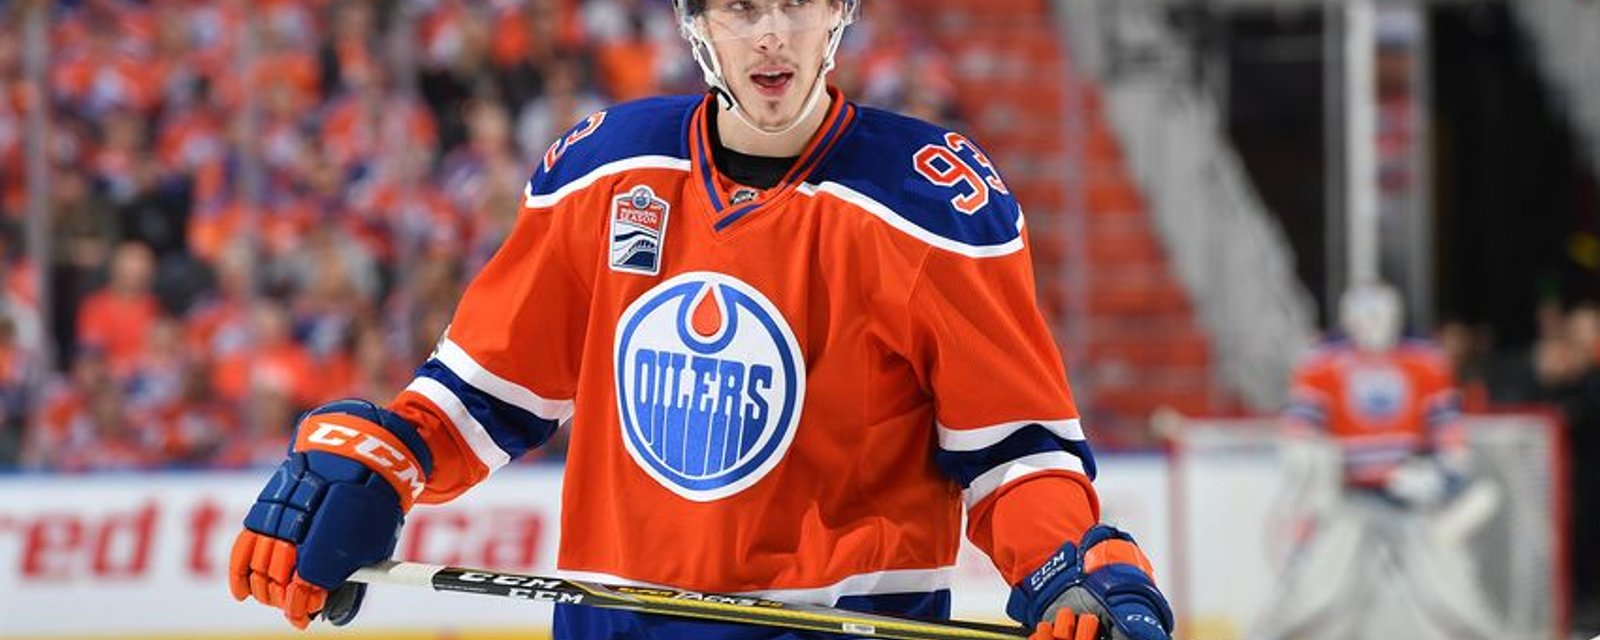 Oilers to trade Nugent-Hopkins for jaw-dropping offer?!